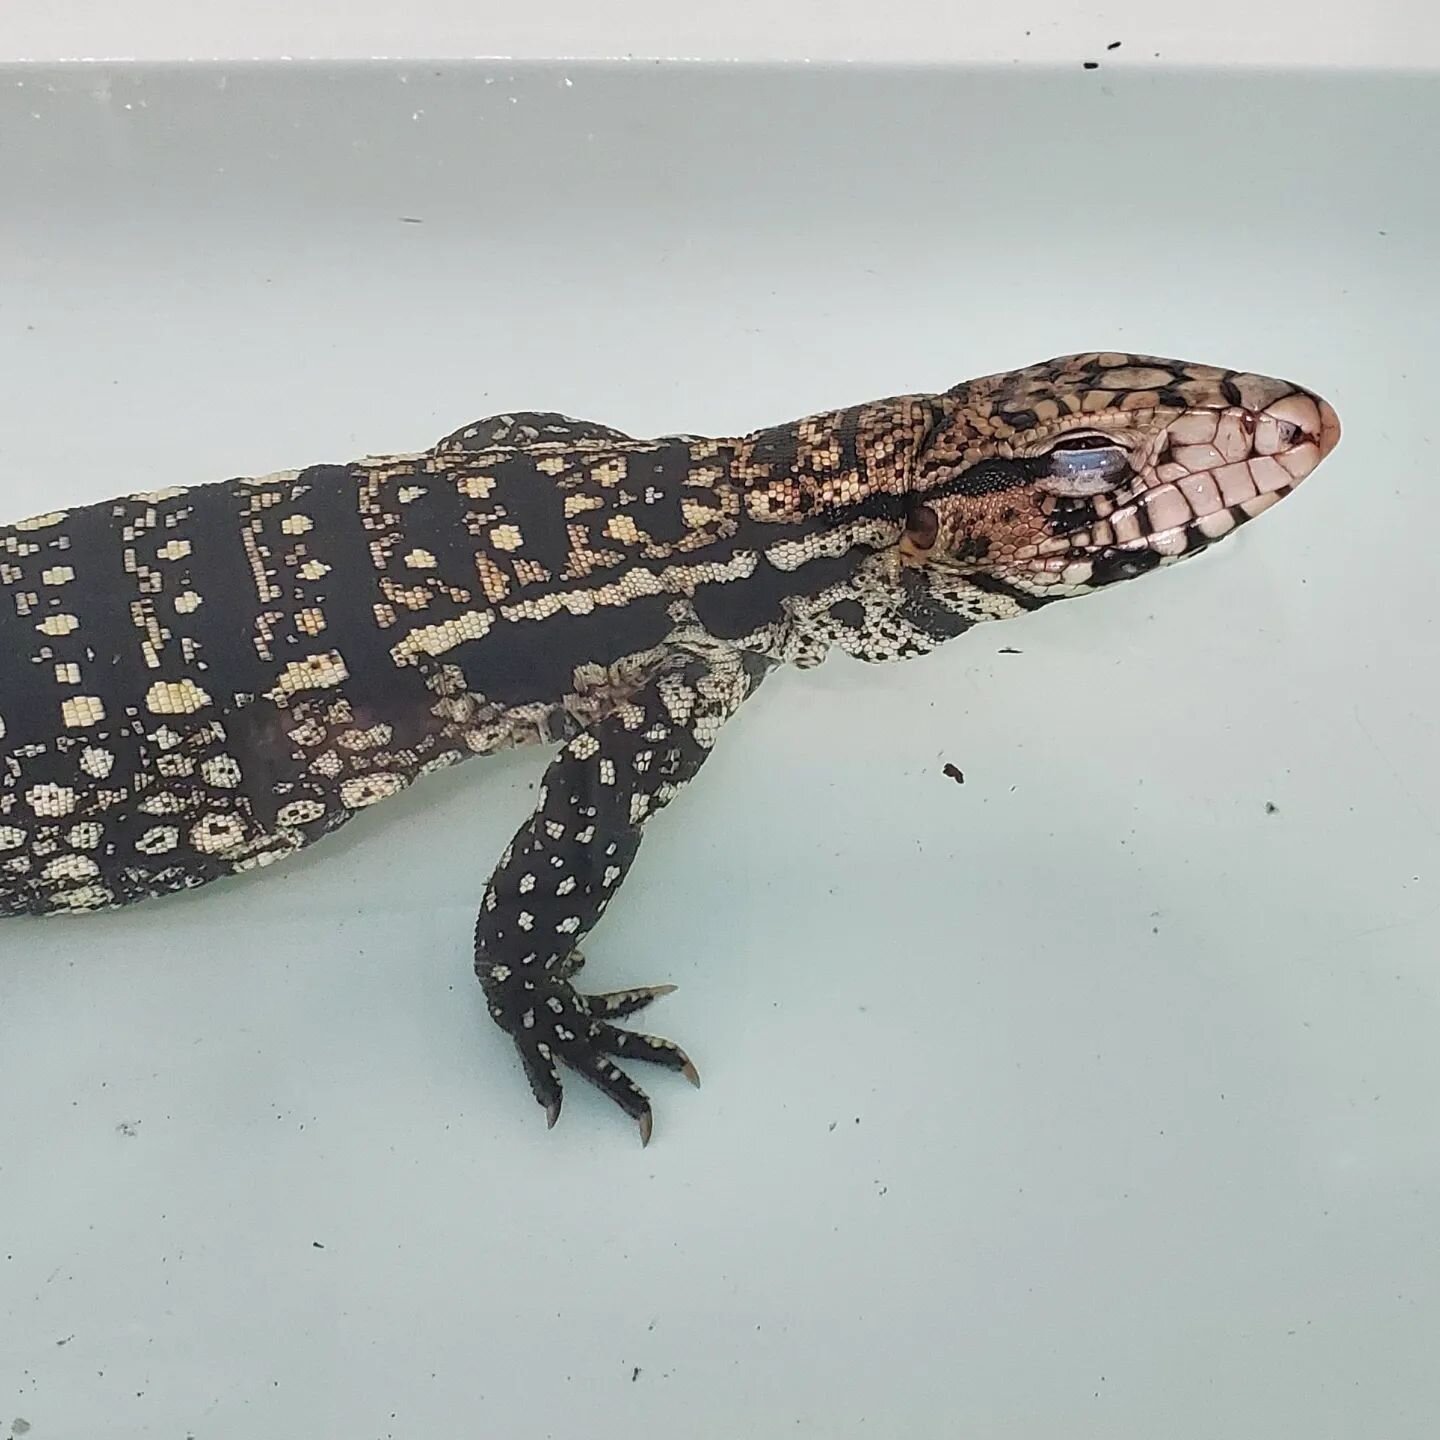 Bath time tegu!  Sammy has been shedding, so a nice warm bath should help. 

He's also still available for adoption!  See our website for more details, centralvirginiareptilerescue.org (link in bio).